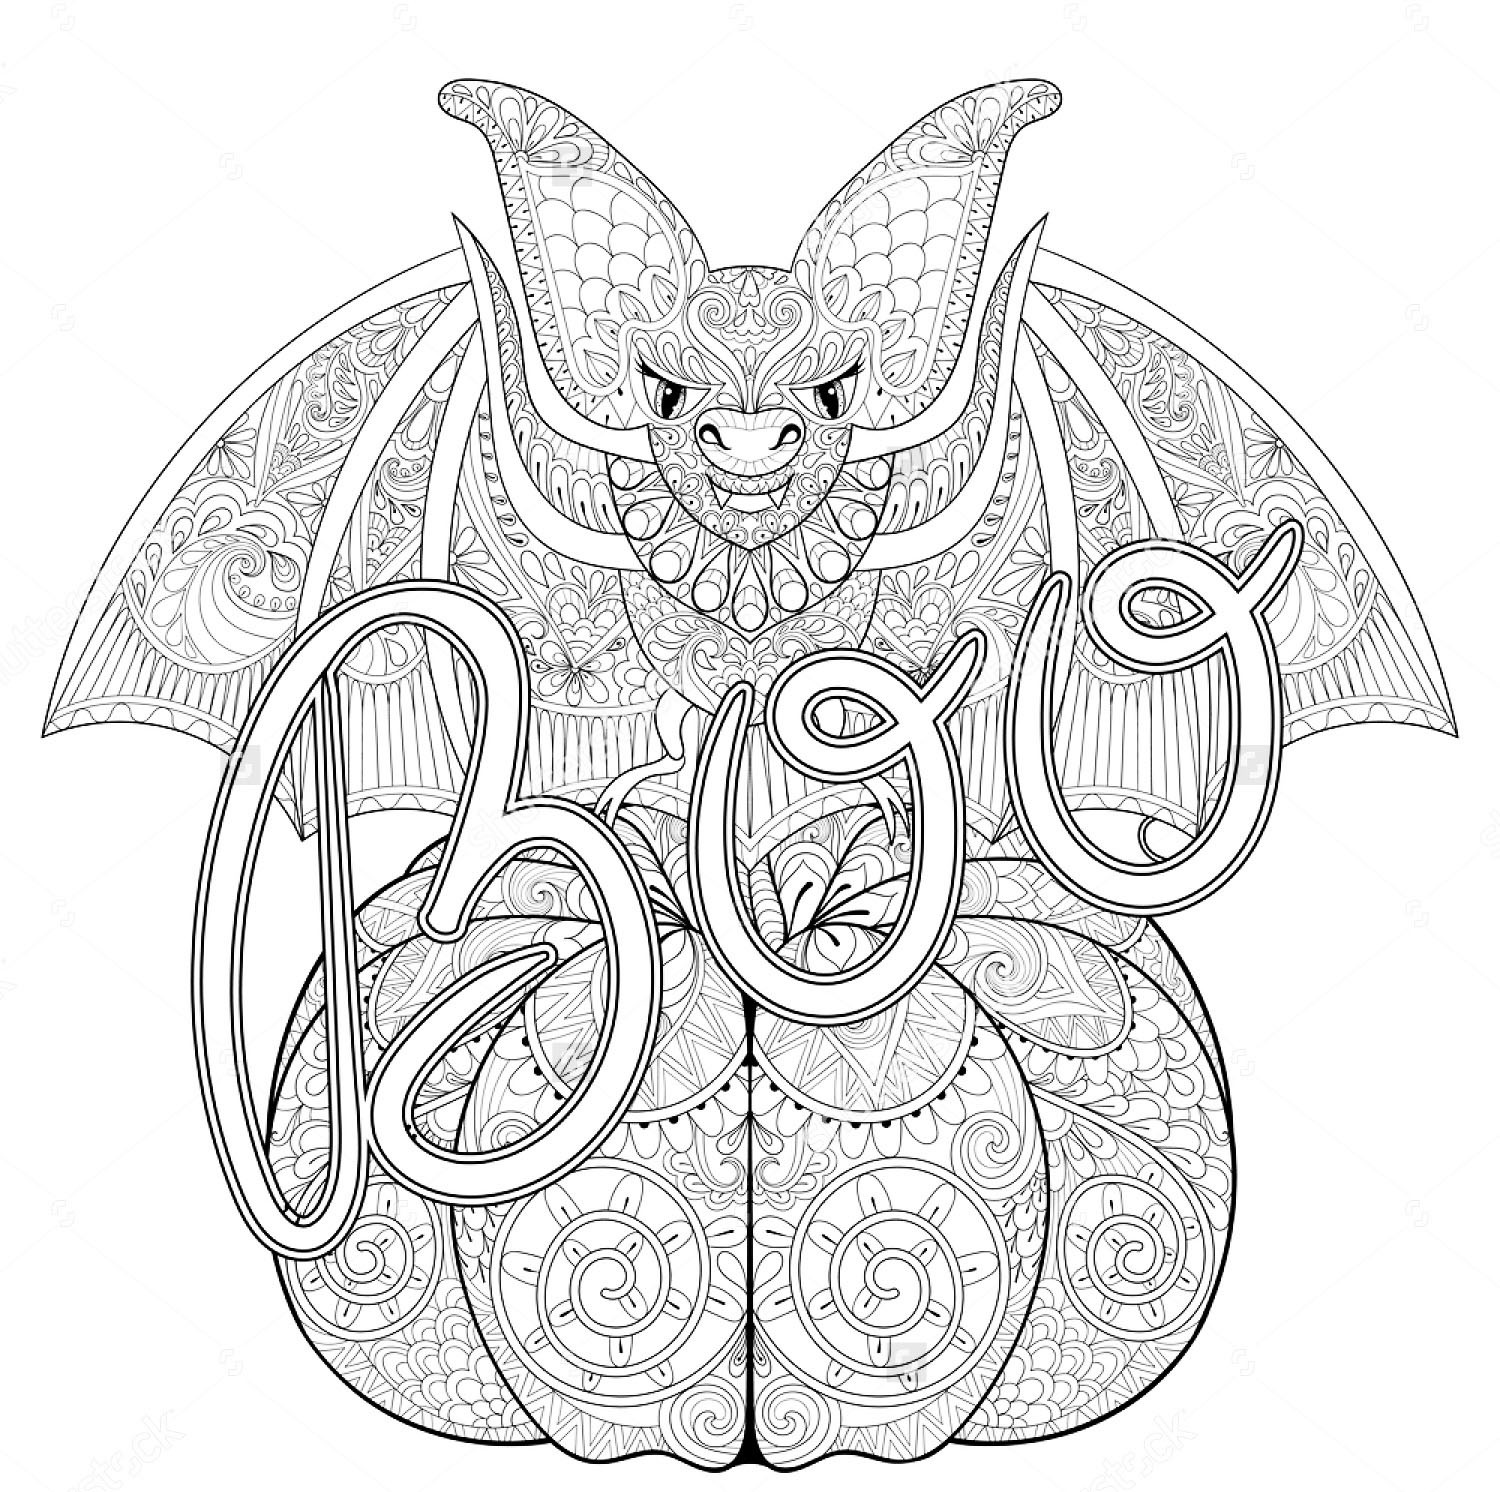 Adult Coloring Pages Halloween
 Halloween zentangle bat Halloween Adult Coloring Pages